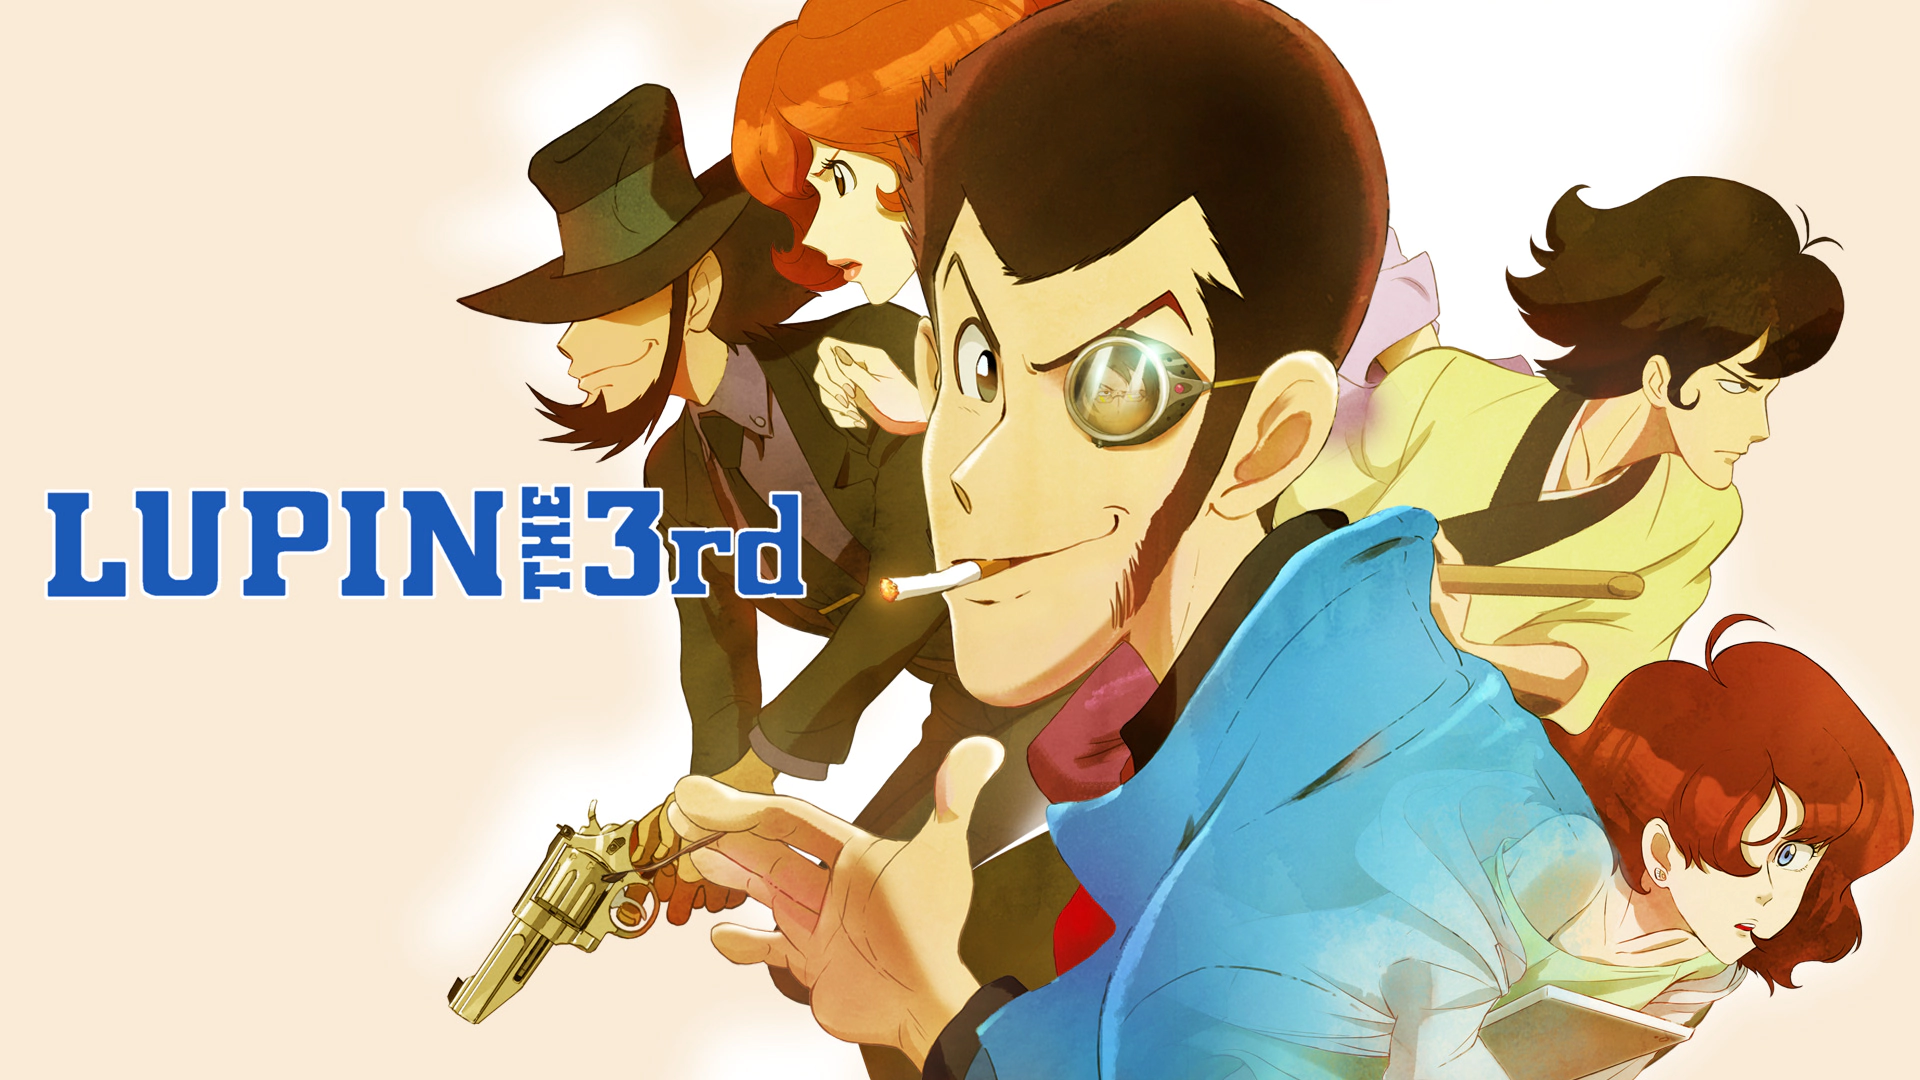 Awesome Lupin the 3rd Tabletop RPG and 50th Anniversary Book Announced In Partnership With Magnetic Press